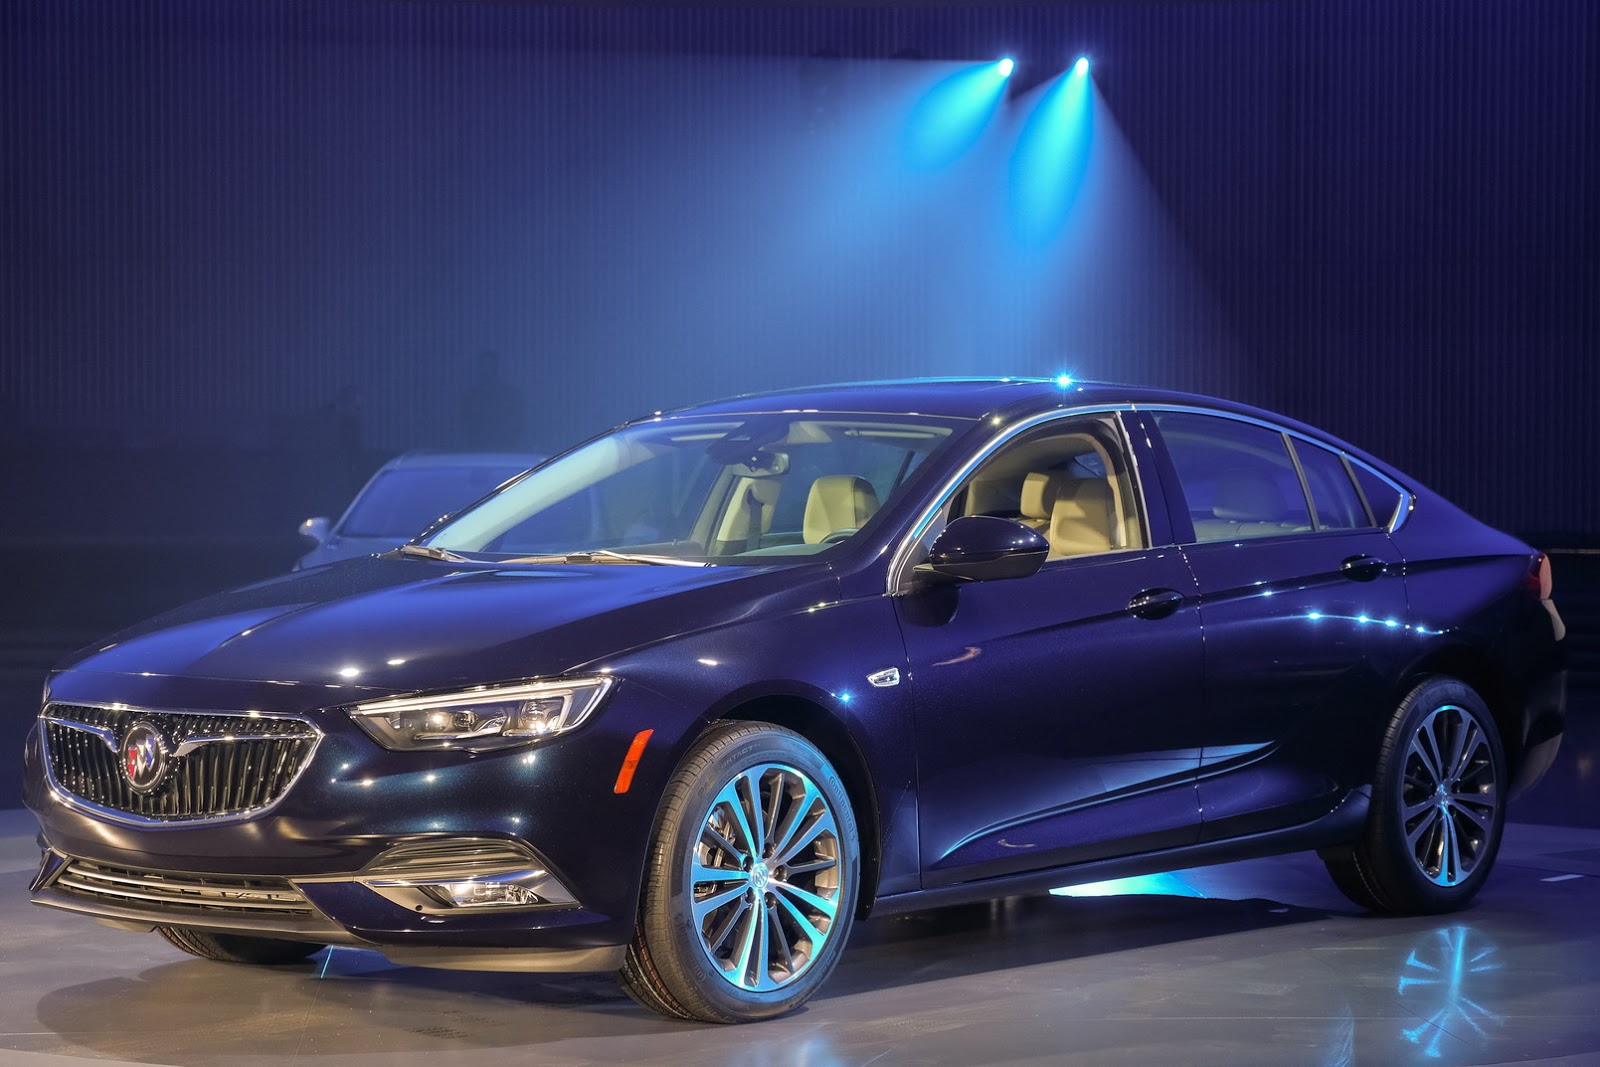 Buick Unveiled 2018 Regal Designed to Take on Audi and BMW